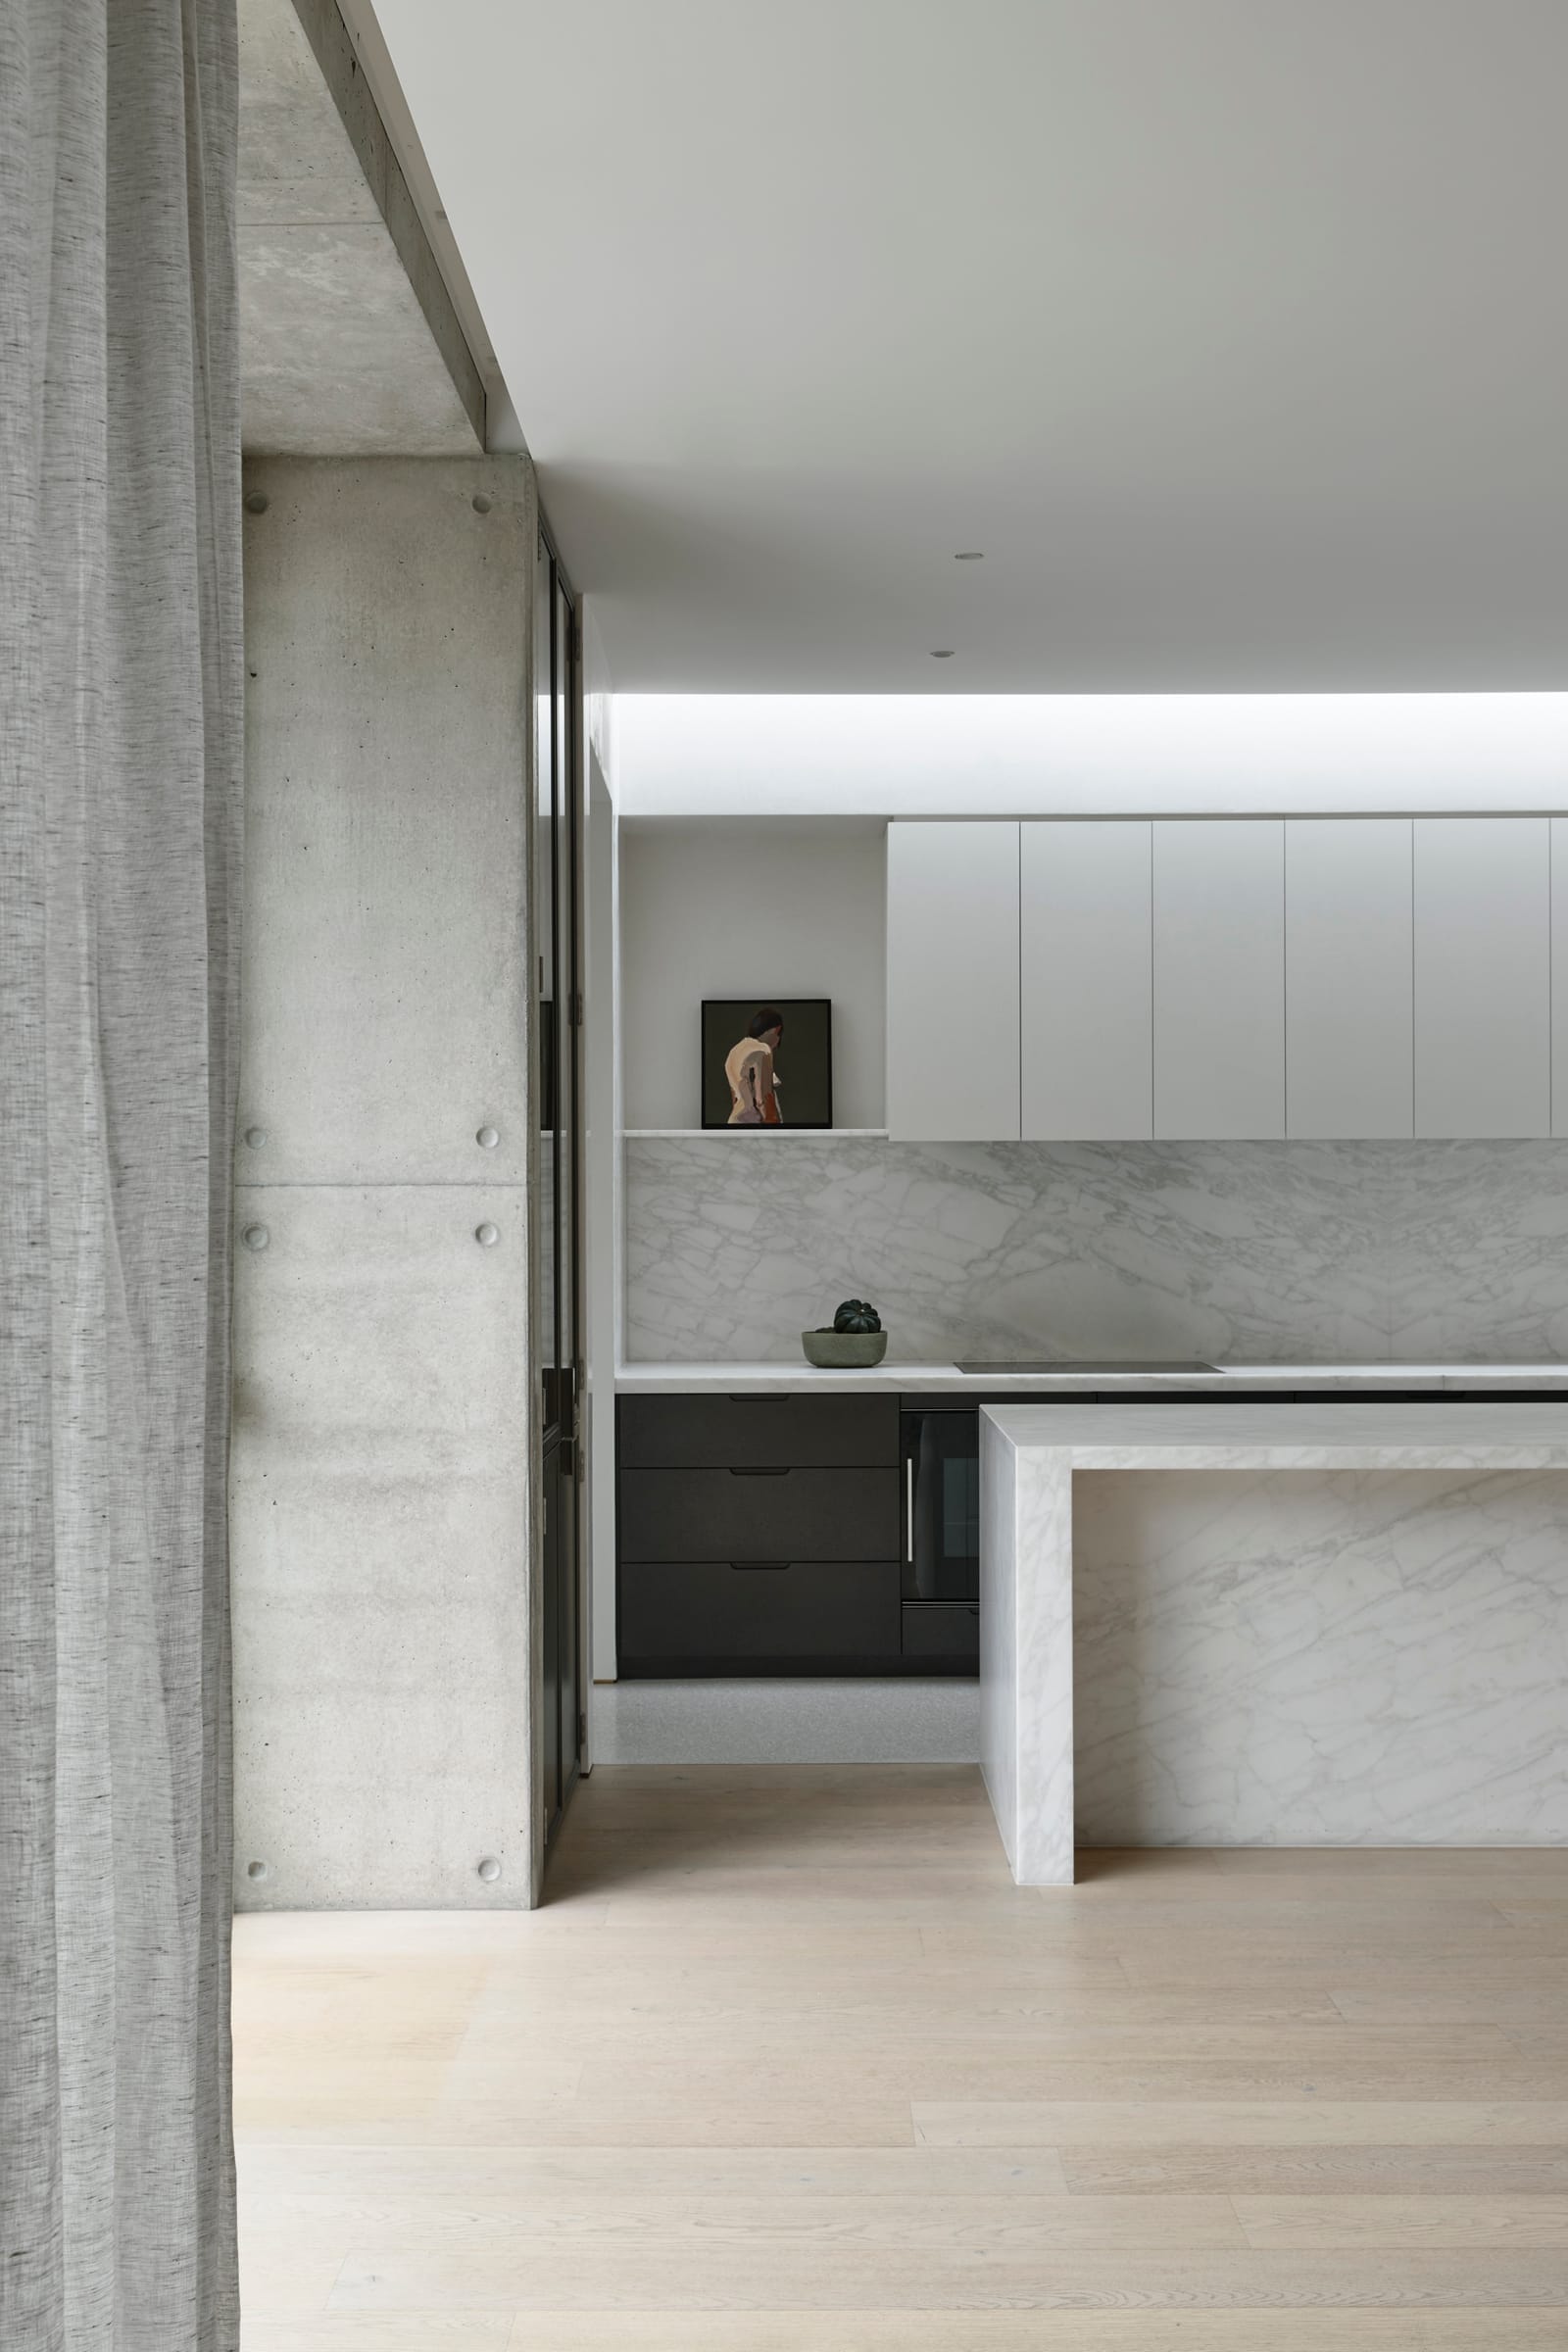 RE Residence by Inglis Architects.interior view of a modern kitchen with minimalist design. A marble island with a waterfall edge is the centerpiece, matched by a marble backsplash. The room is framed by light wooden flooring and a concrete ceiling, with white cabinetry on the wall and a black cupboard below the counter. A small sculpture is visible on a shelf, adding a personal touch to the space.